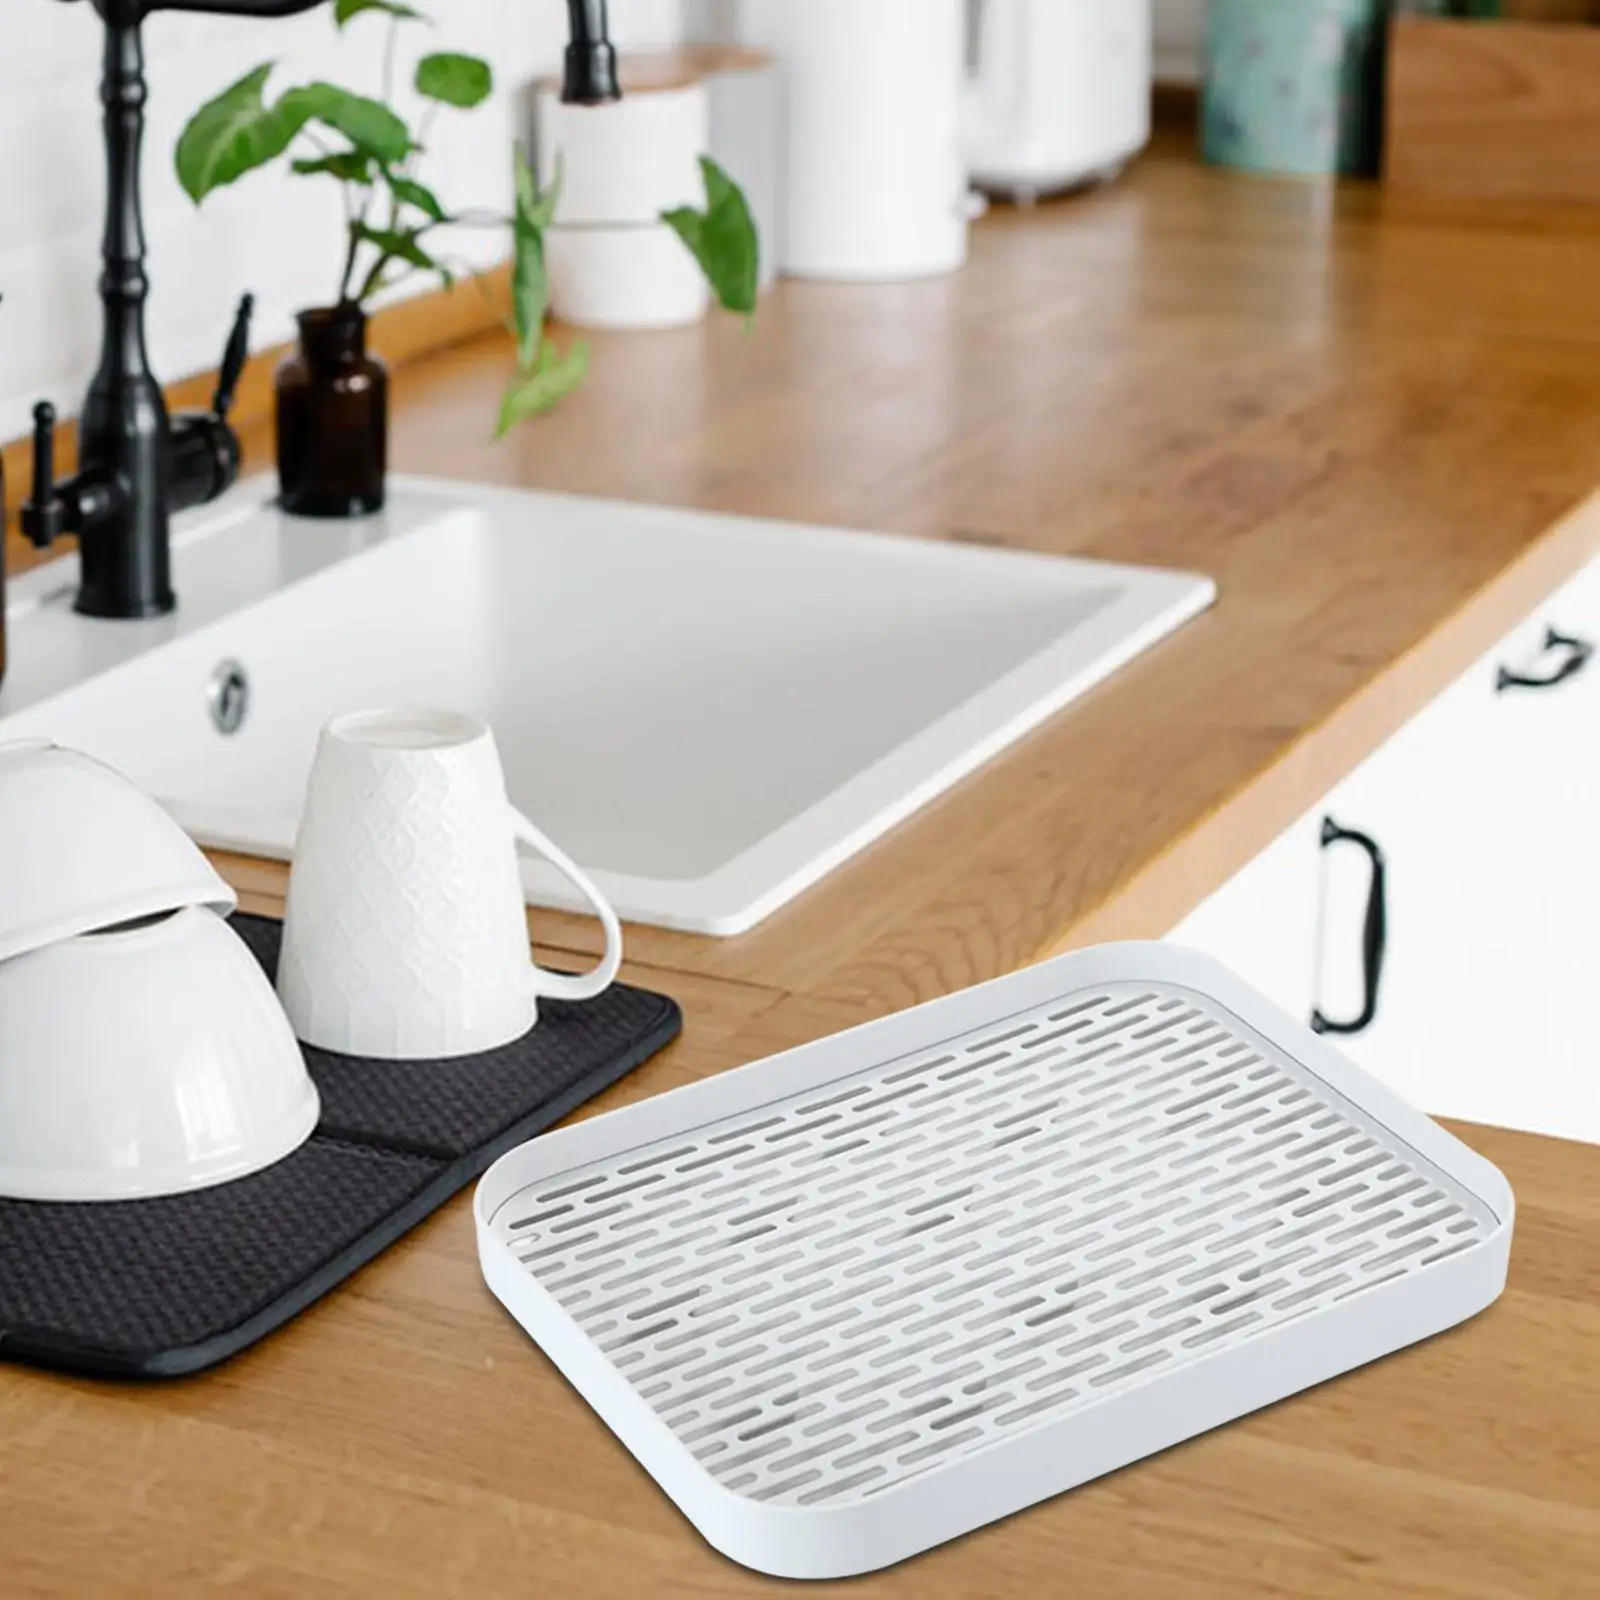 Countertop Drain Tray Serving Storage Tray Detachable Drainer Shelf Vegetable Fruit Draining Holder for Home Kitchen Cup Mug